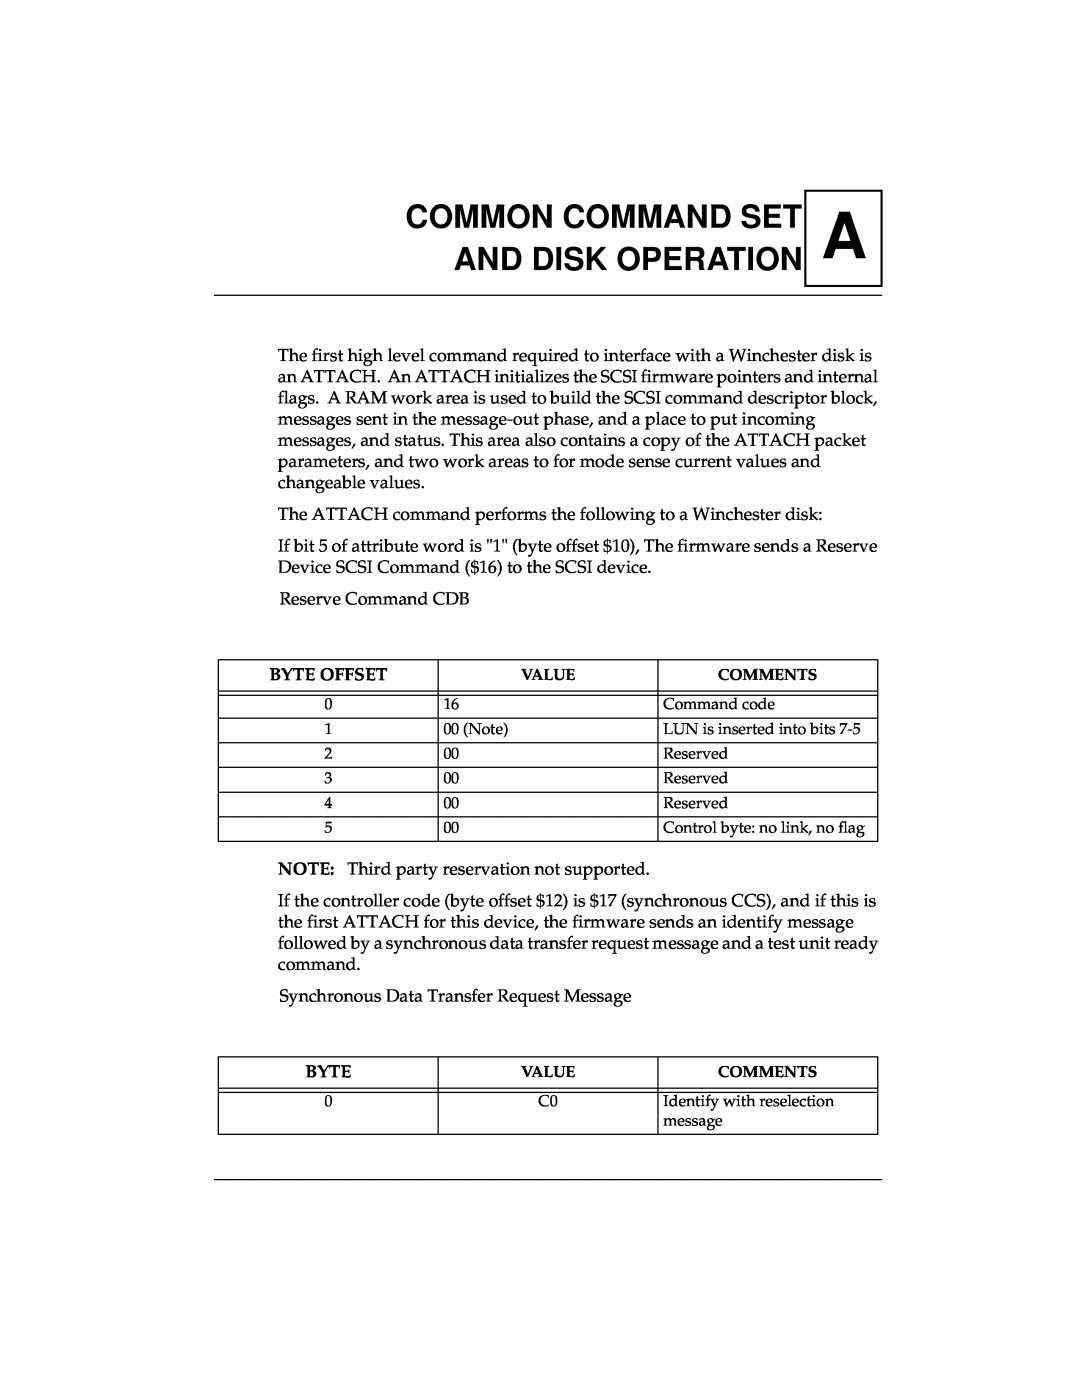 Emerson MVME147 manual Common Command Set And Disk Operation, Byte Offset 